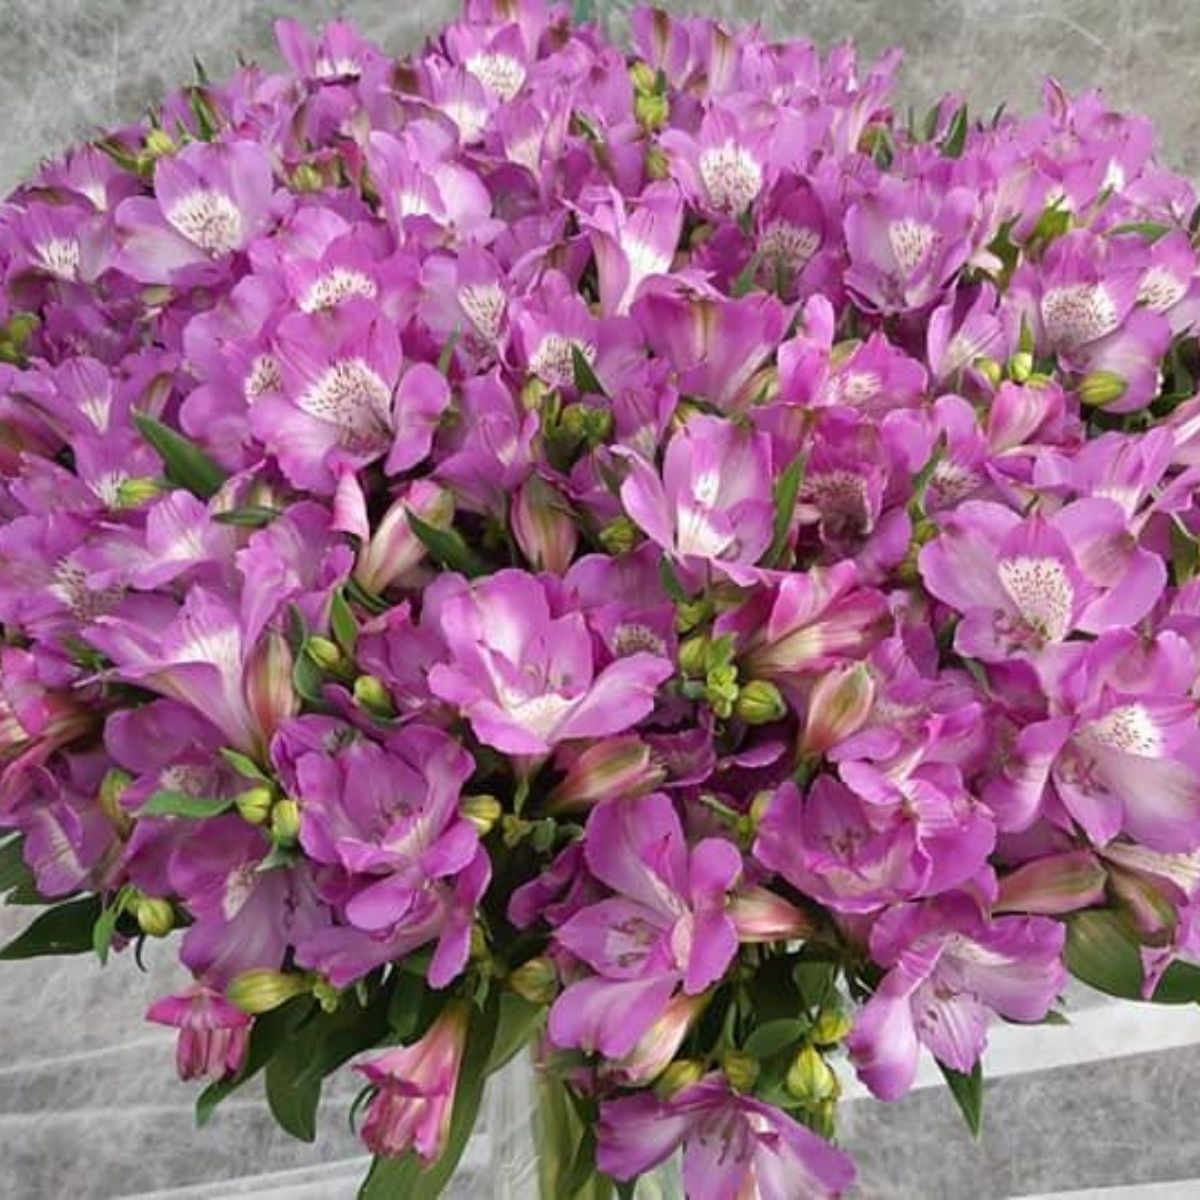 a-time-lapse-of-the-alstroemeria-ardenne-featured